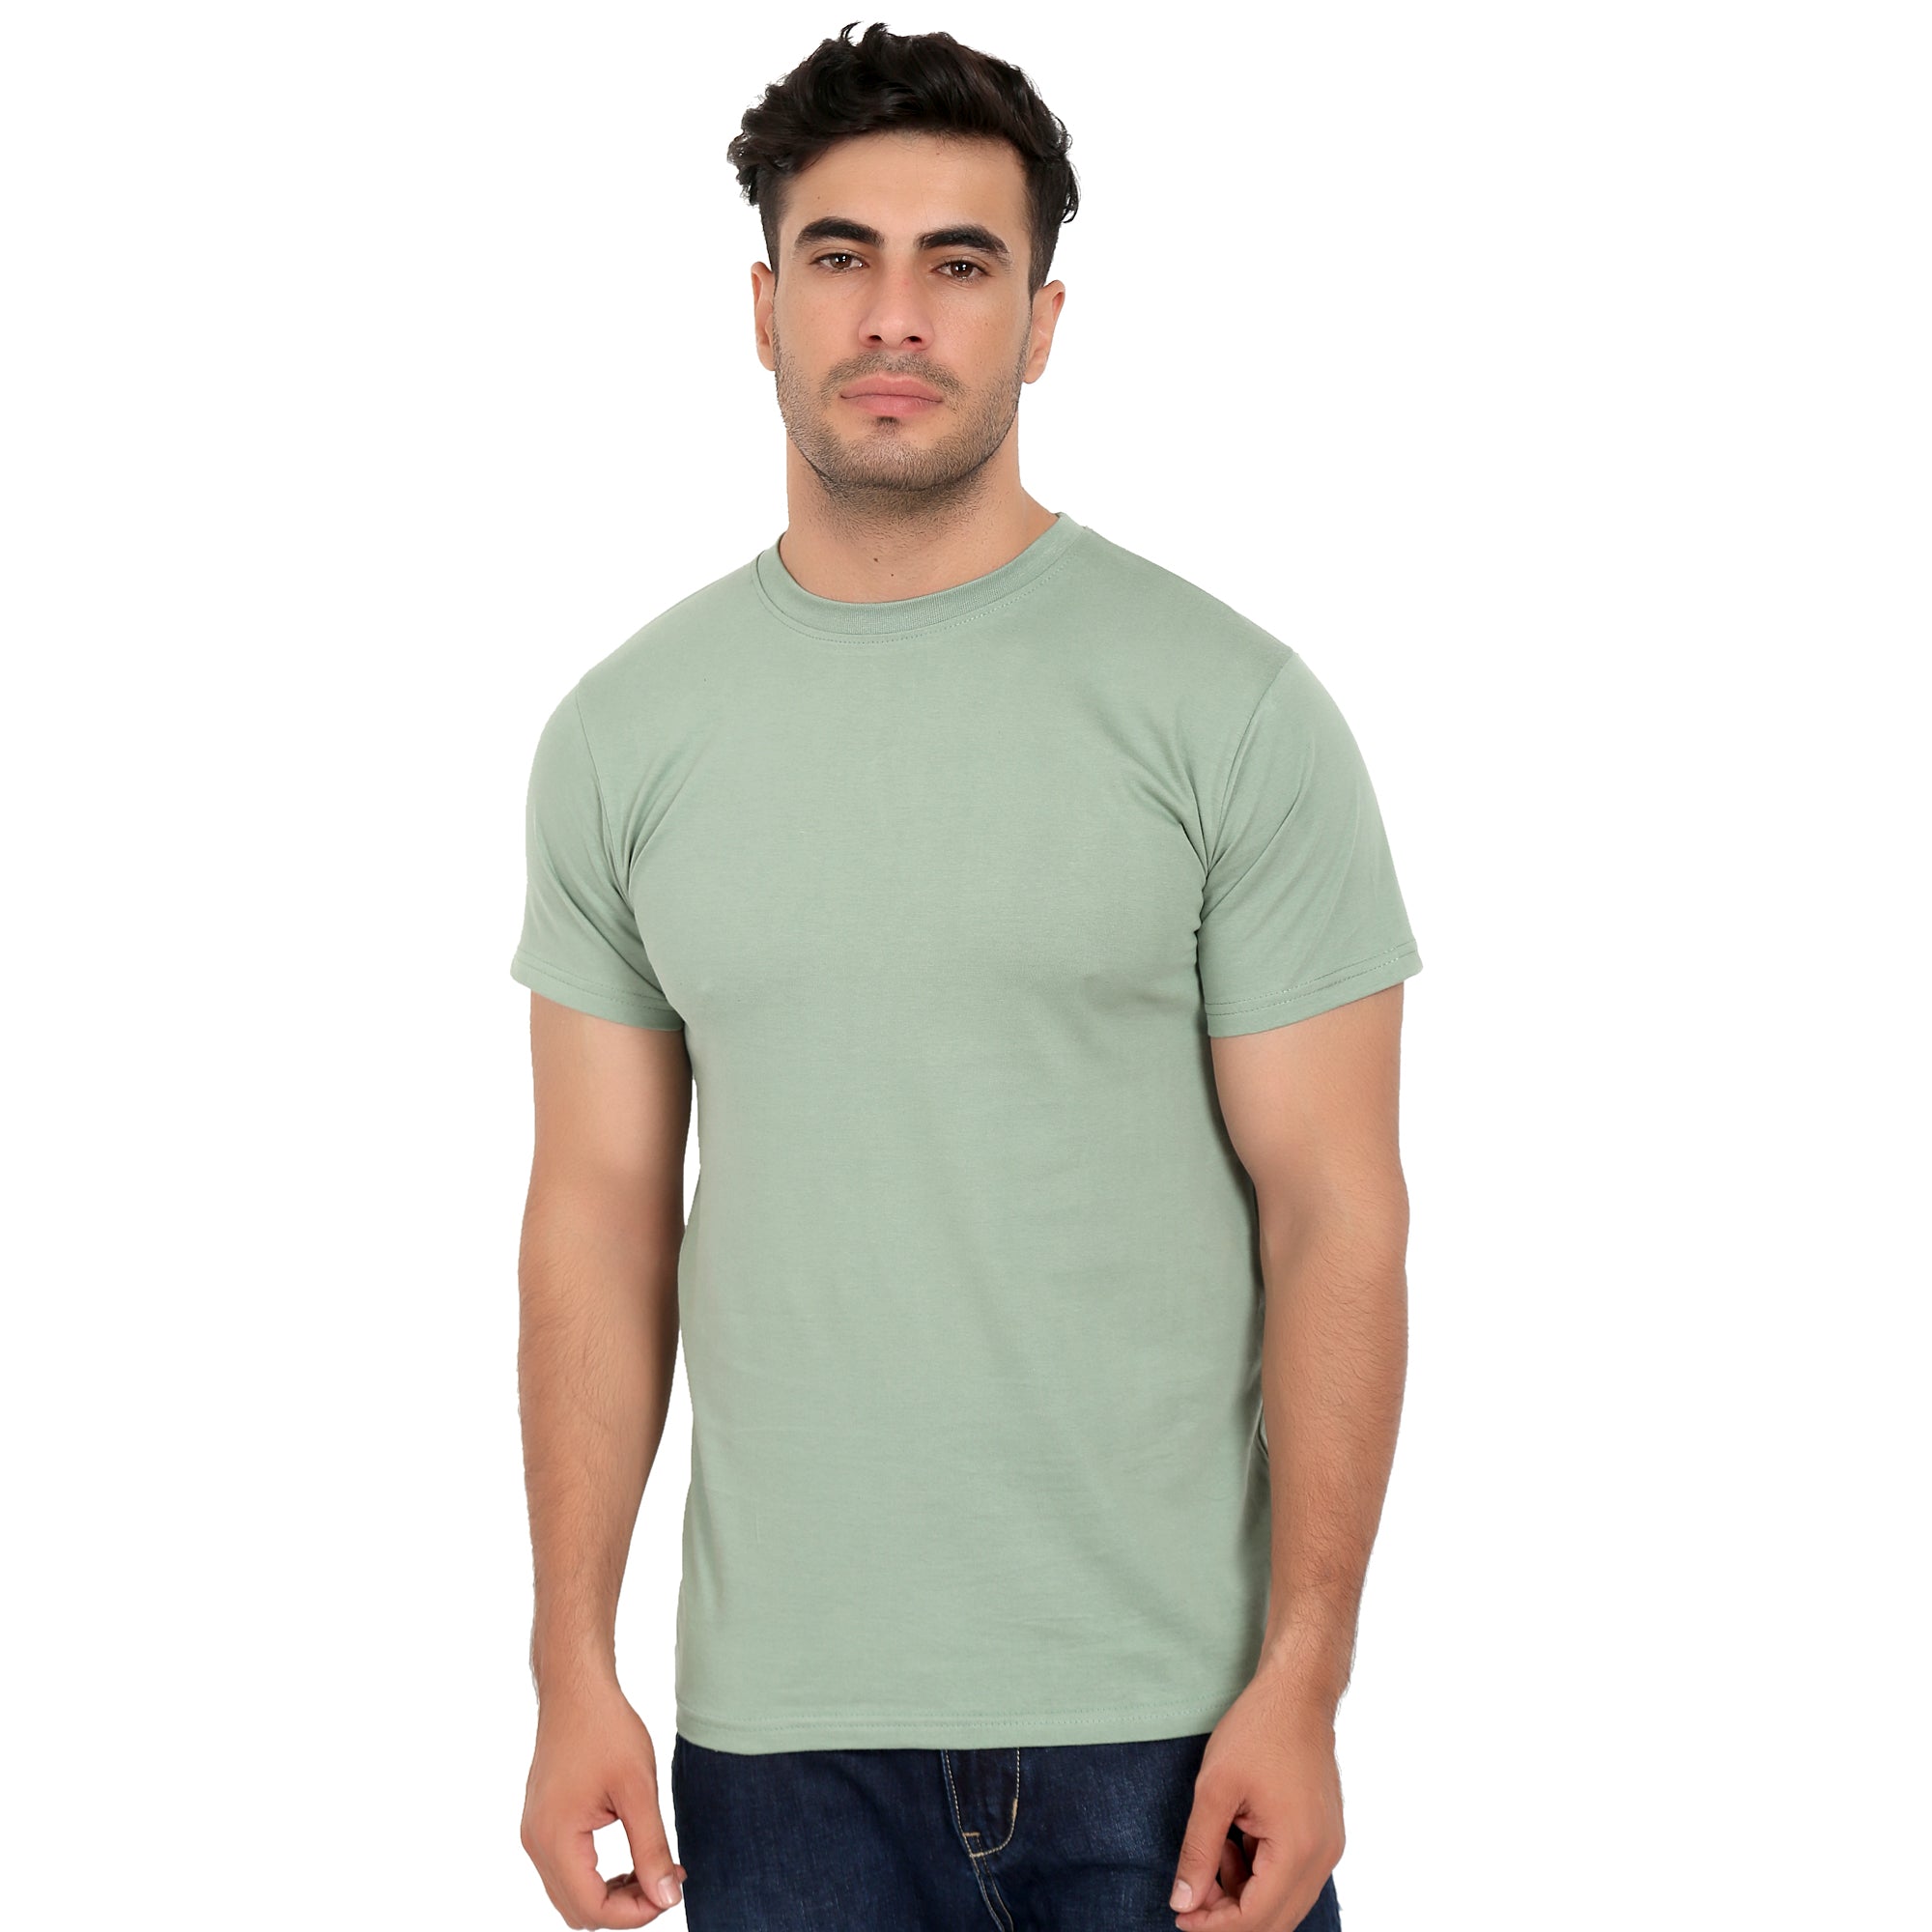 Combo Offer - Men Crew Neck Cotton T-Shirts - Half Sleeves - 3 Colors - Olive Green, Yellow & White